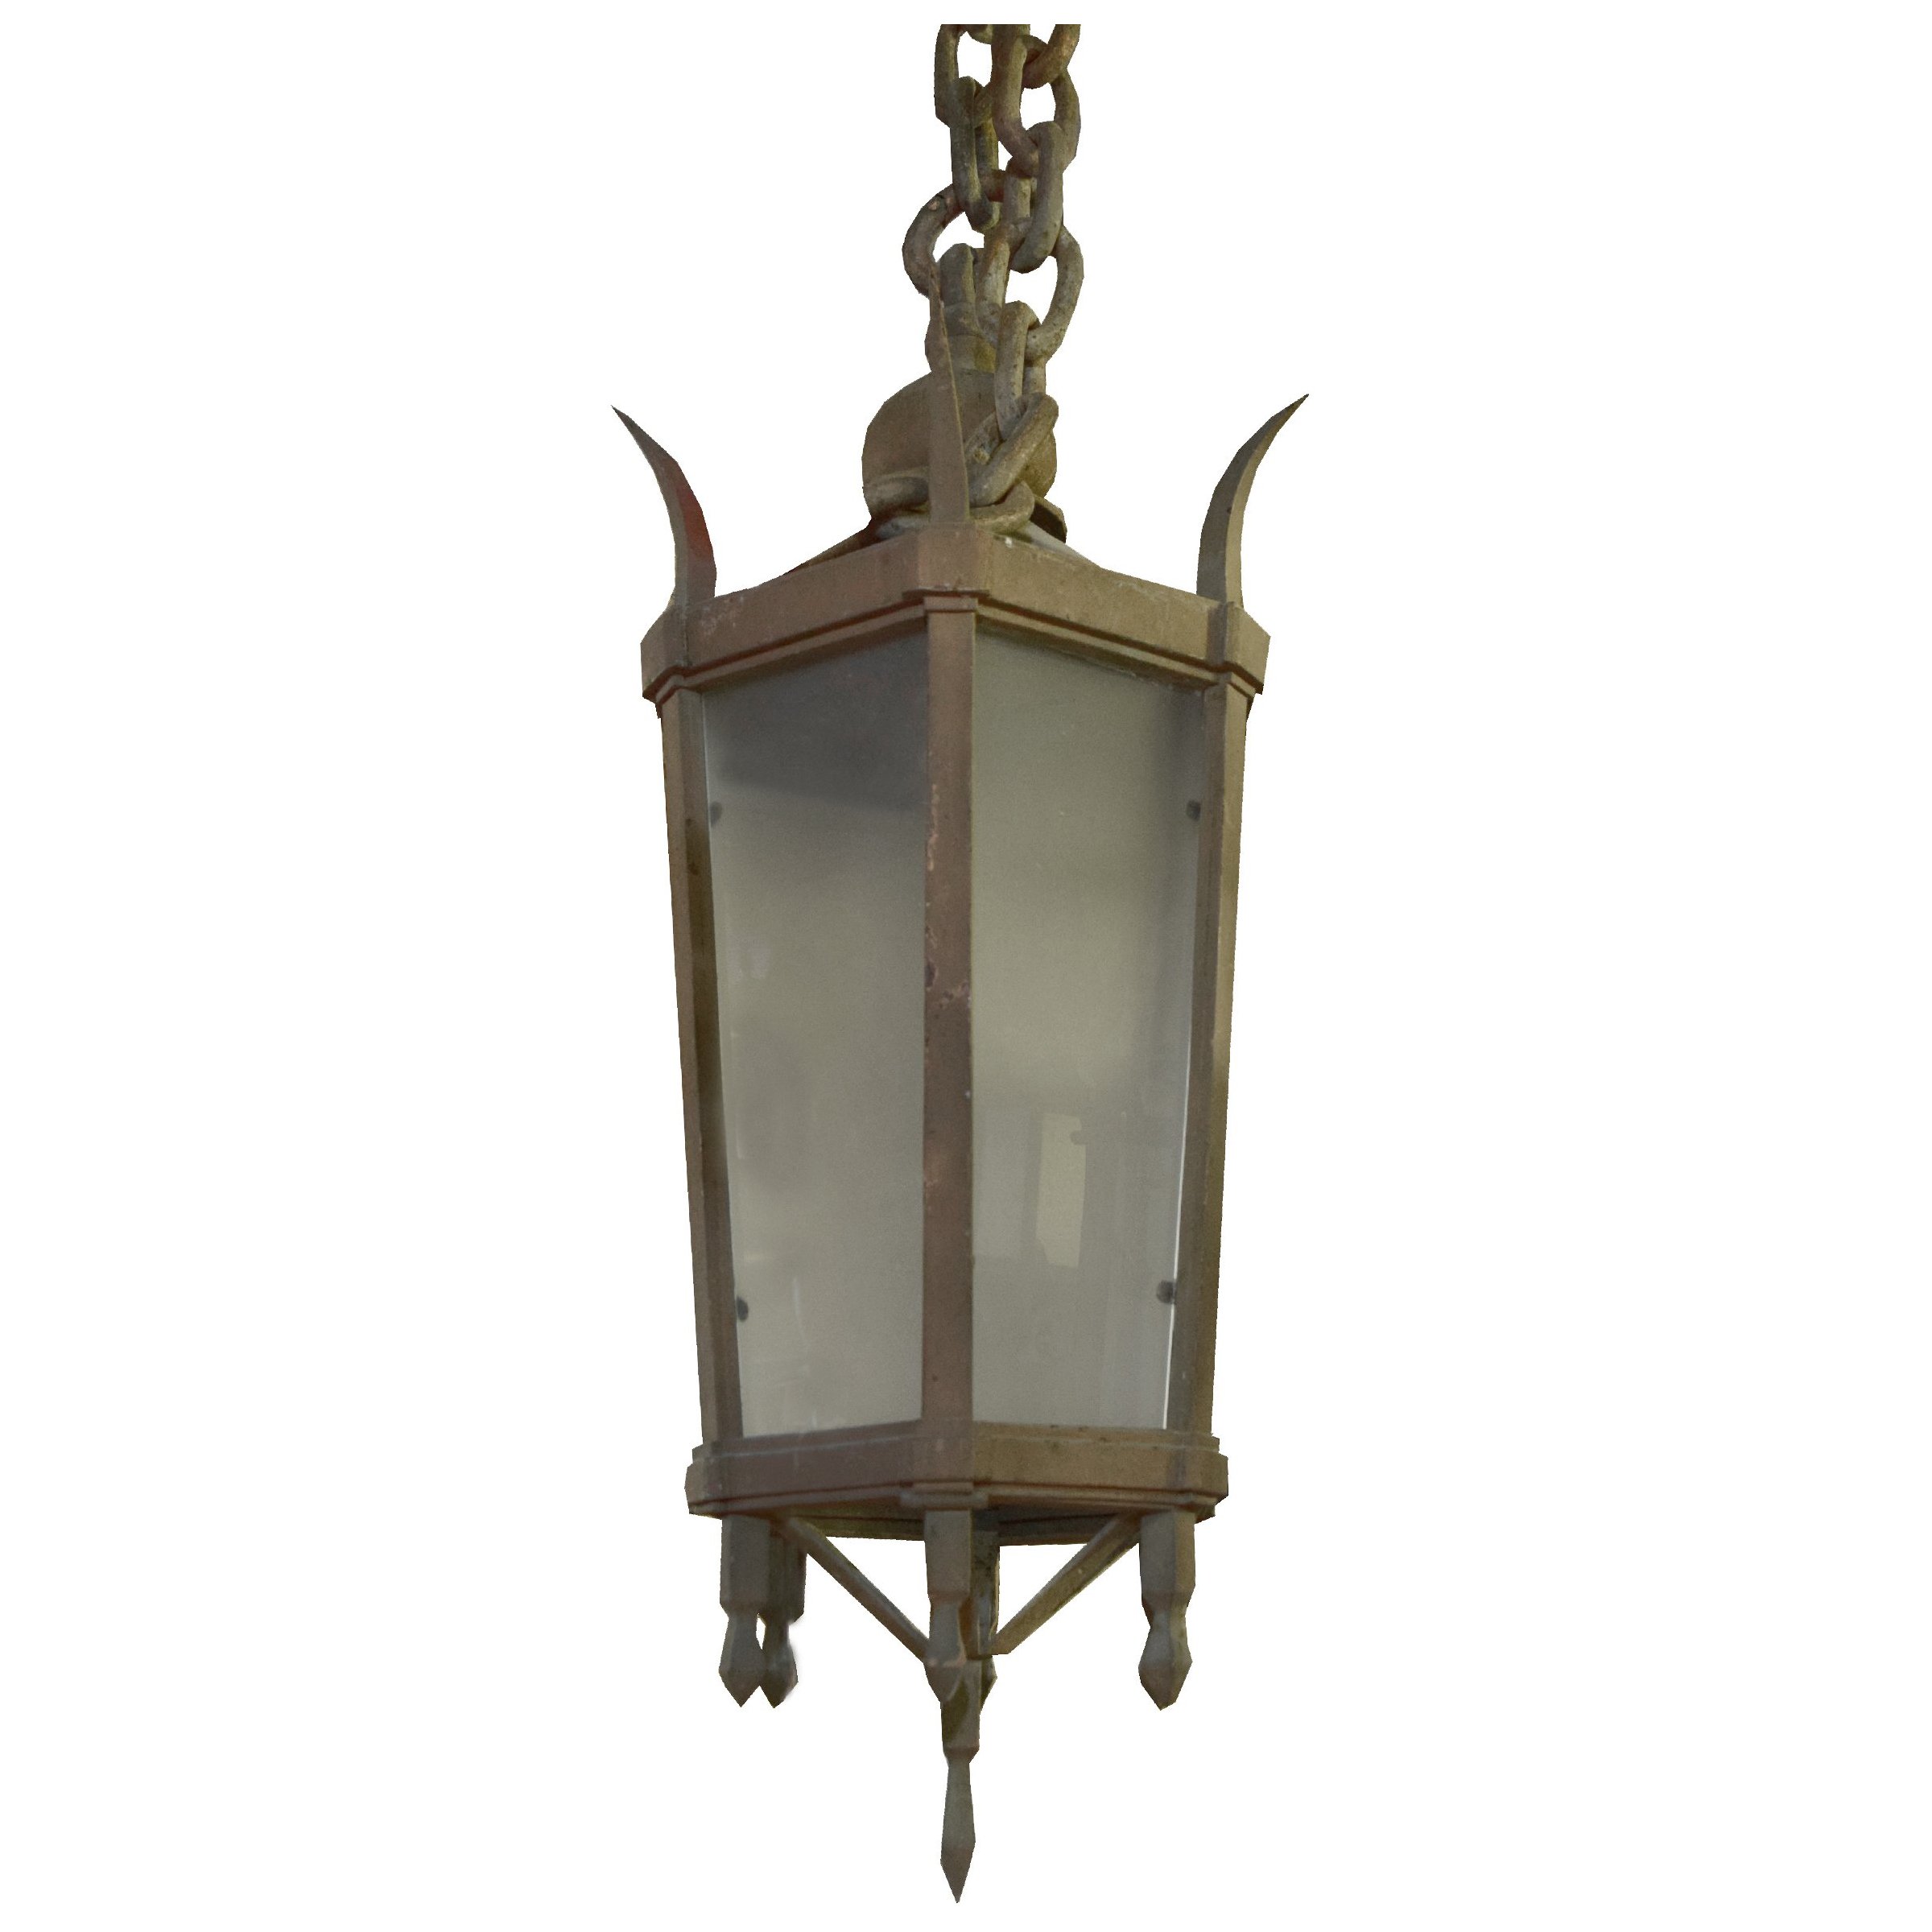 Large American Cast Iron Street Light Fixture Lantern For Sale at ...